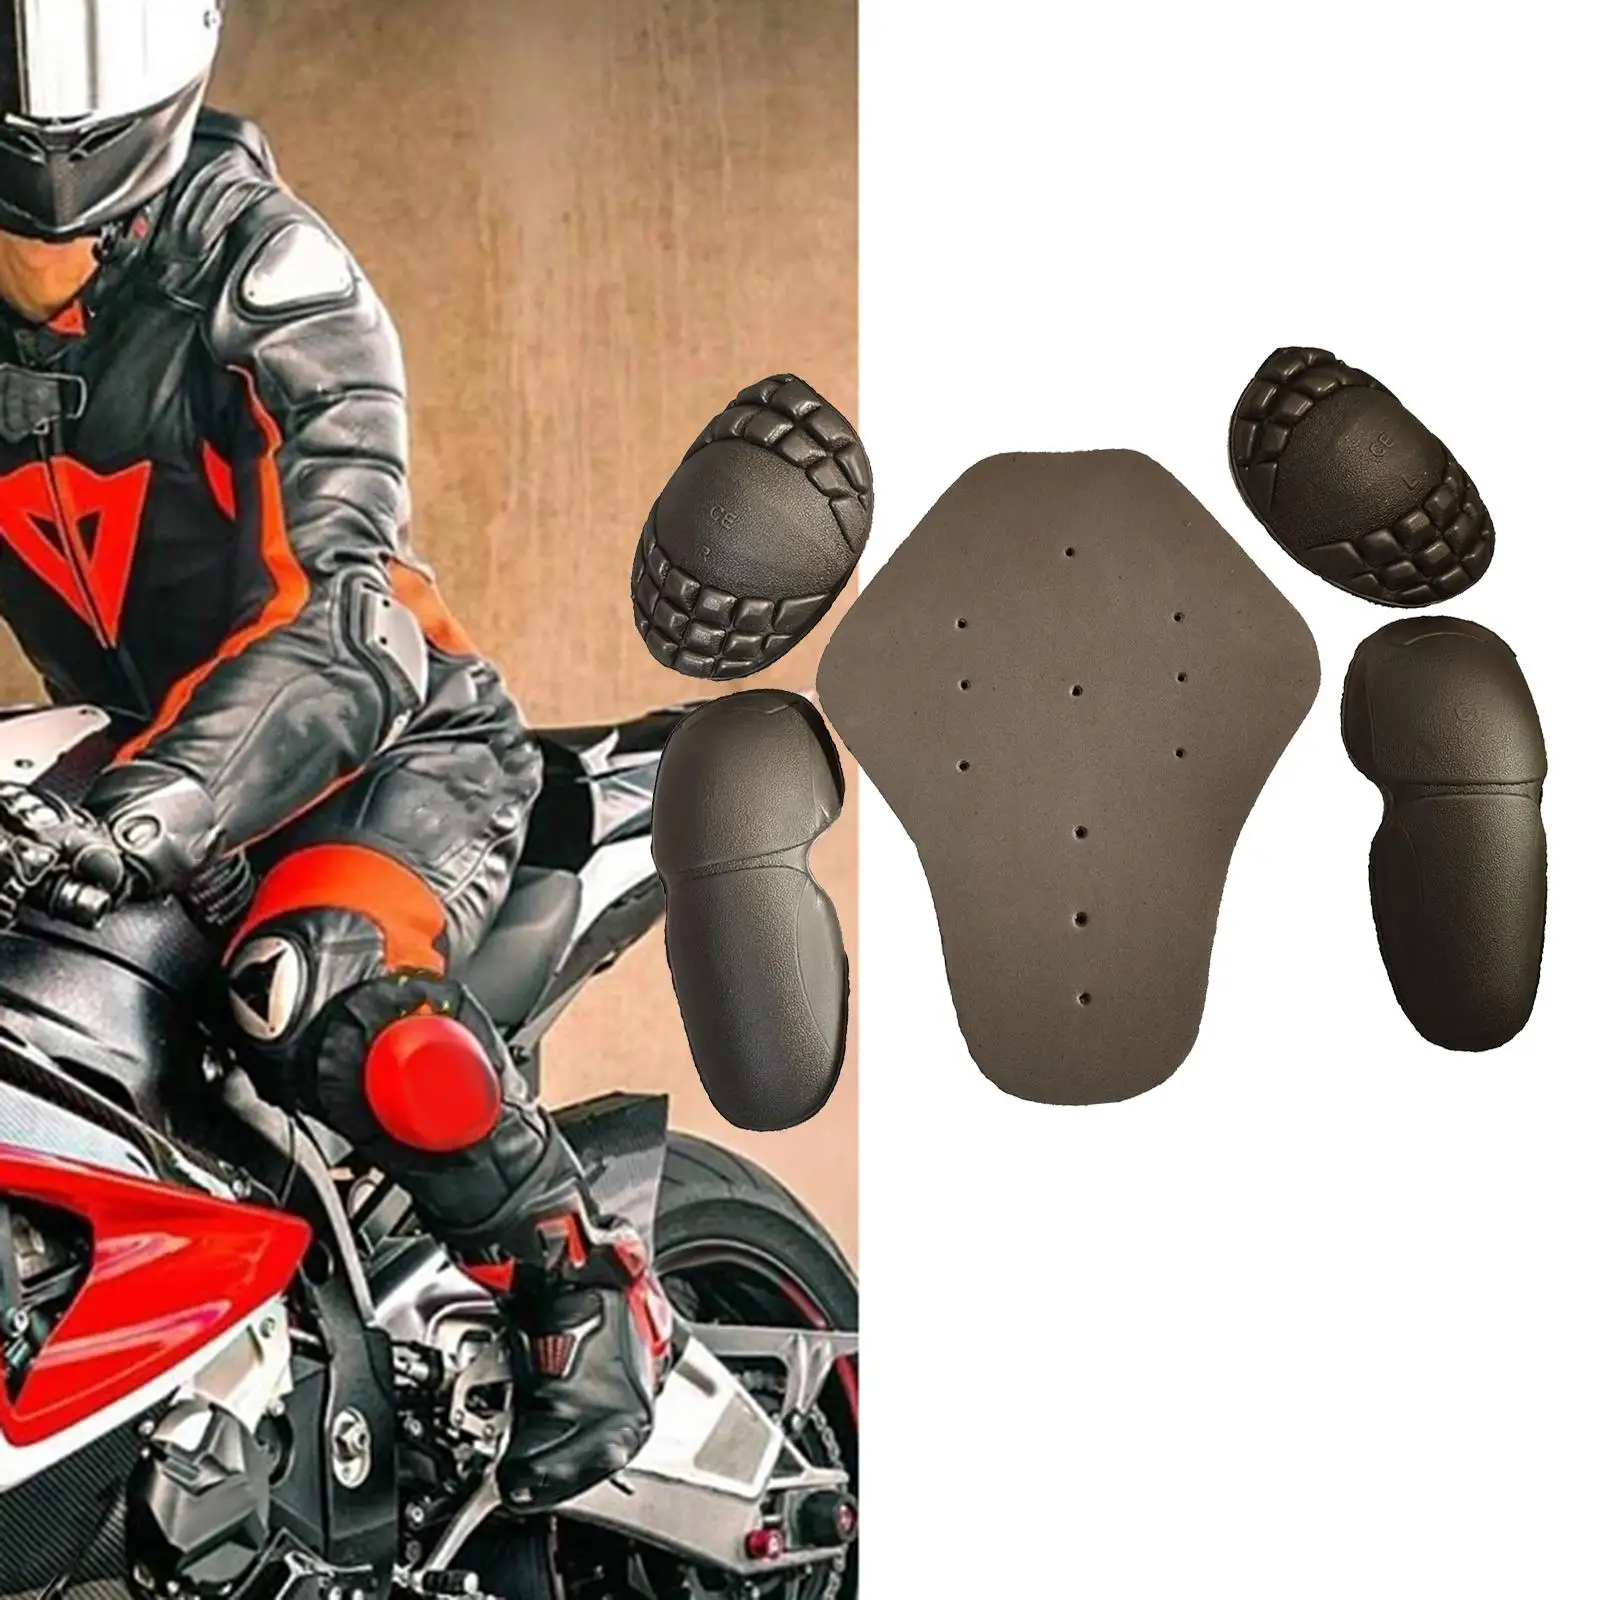 5Pcs Motorbike Body Protective Gear Insert Protector Set Motorcycle Accessories for Biker Cycling Motocross Sport Biking